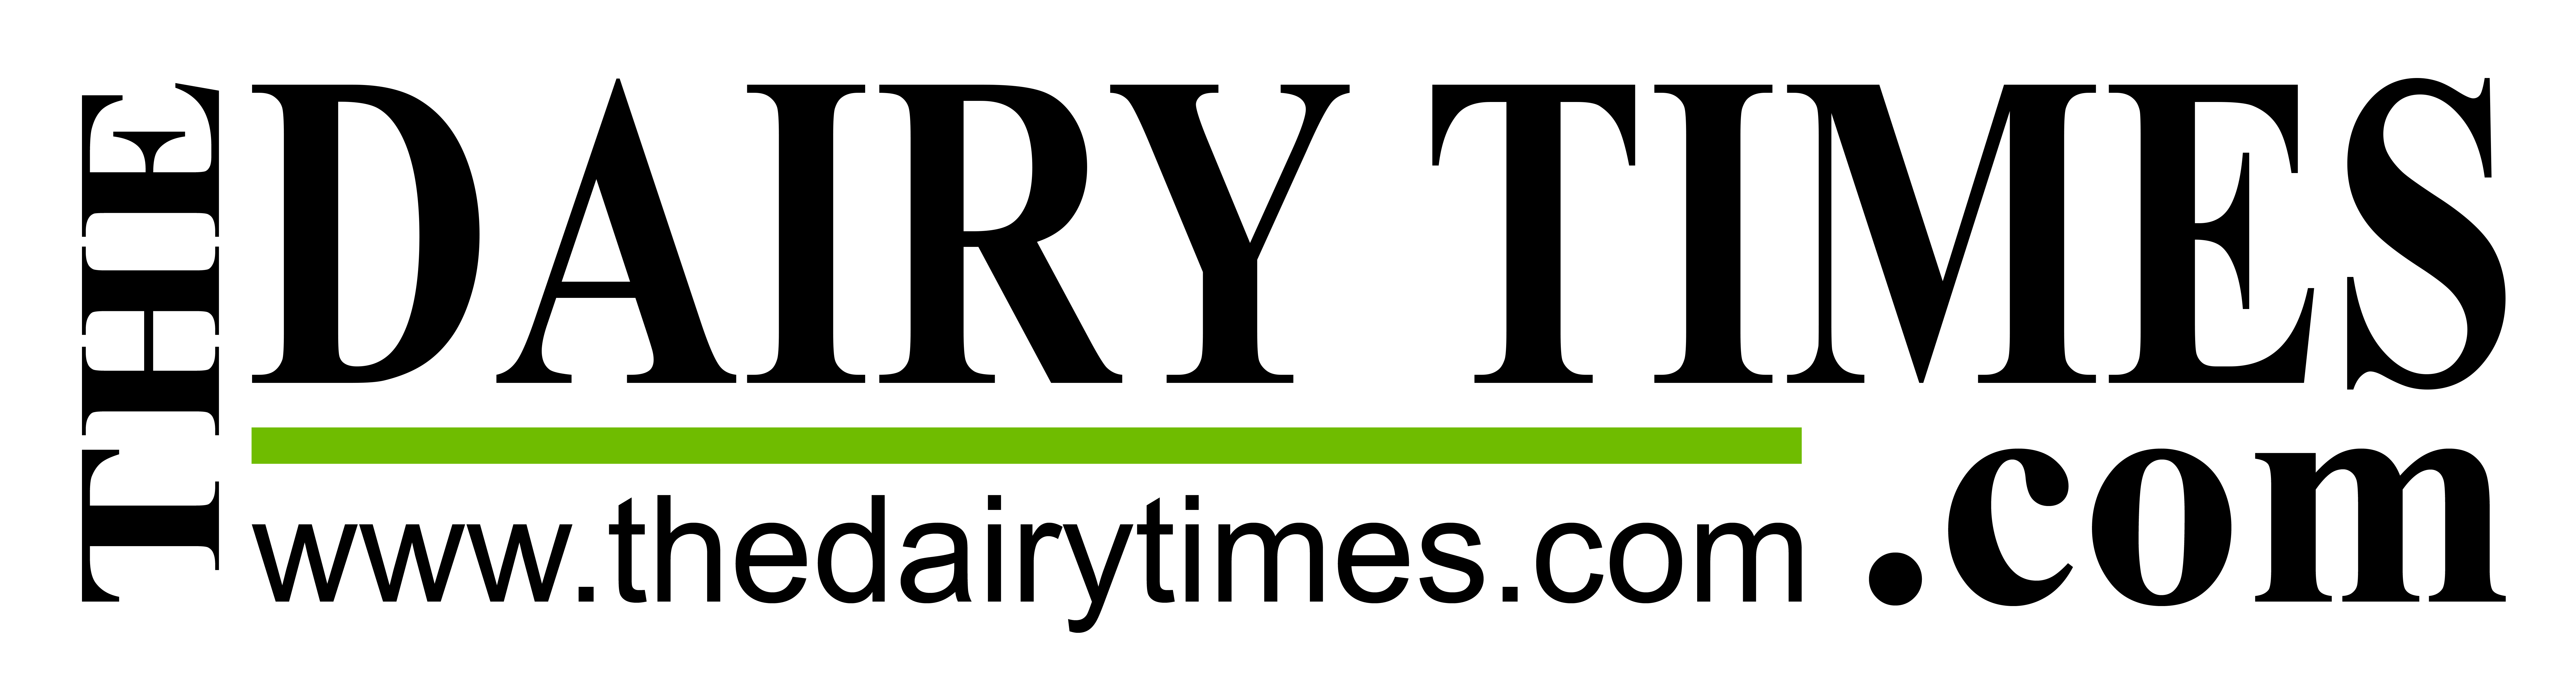 The Dairy Times